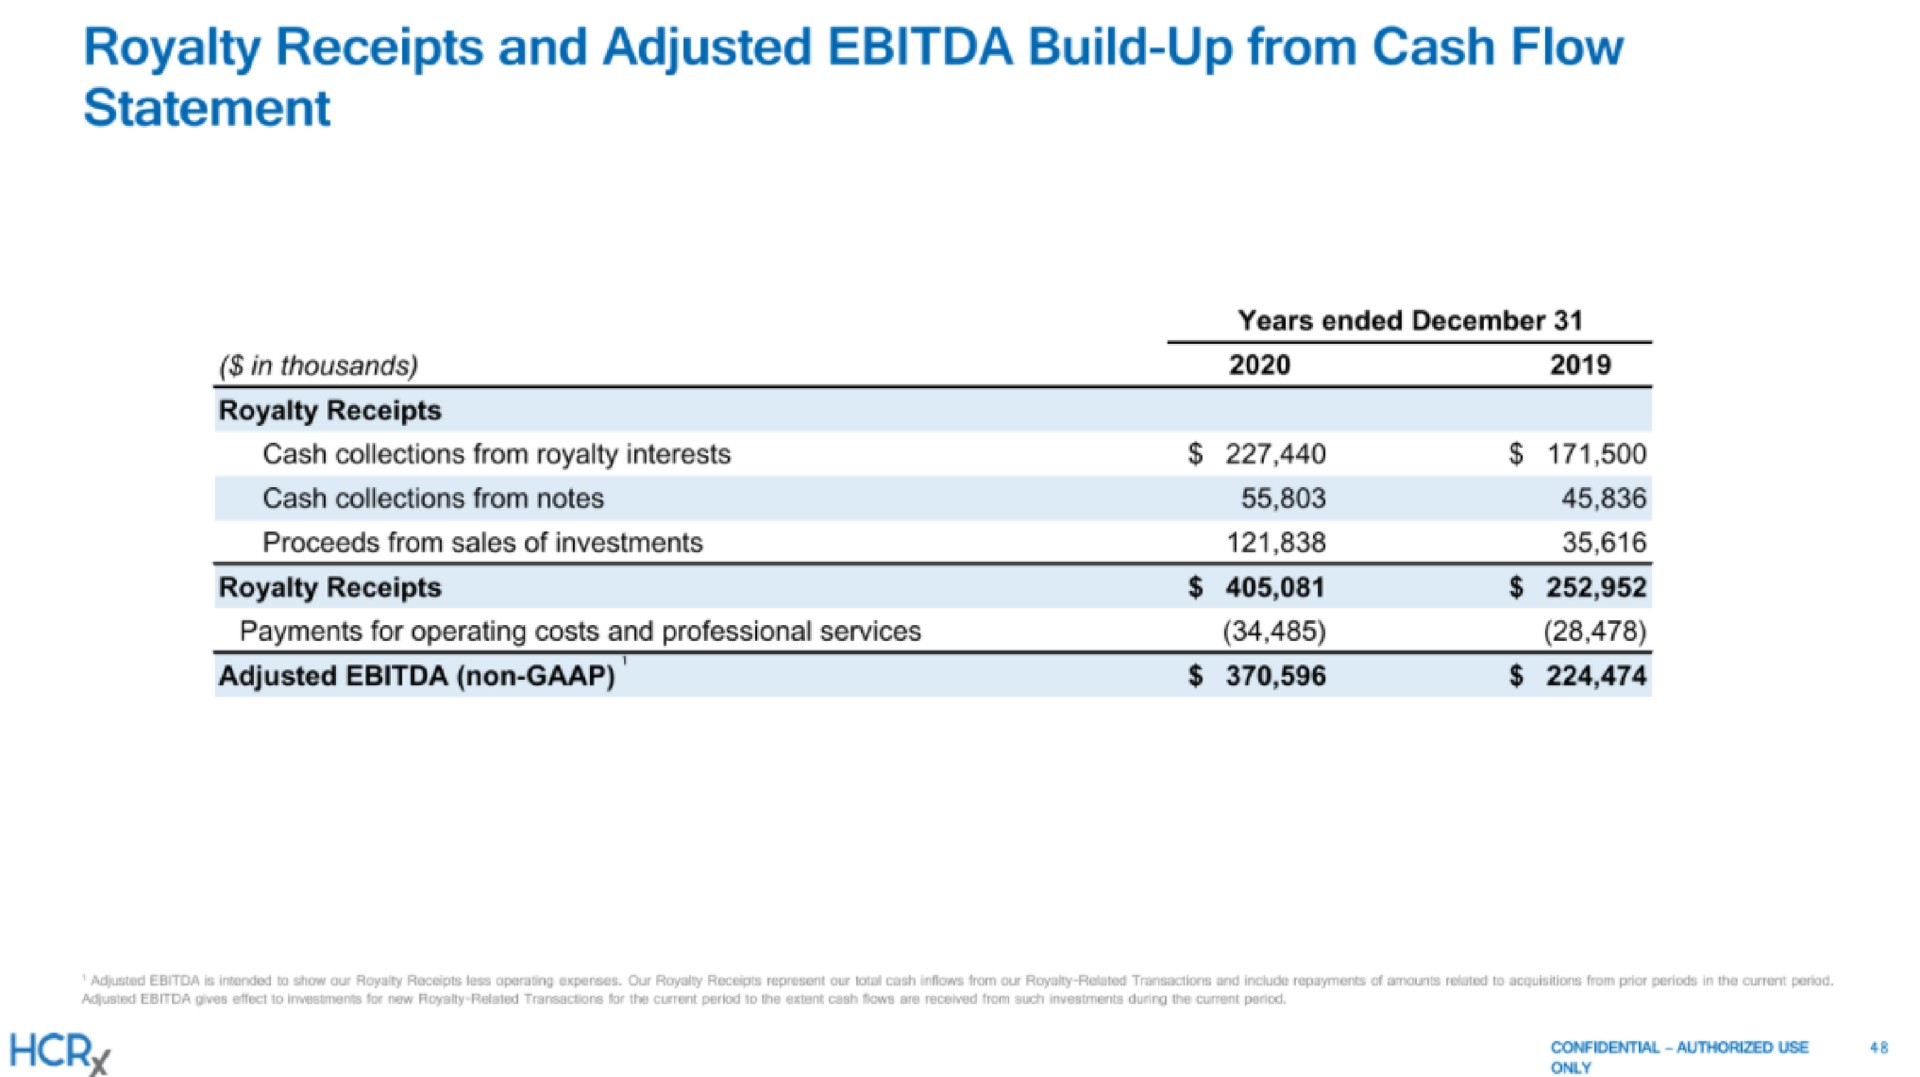 royalty receipts and adjusted build up from cash flow statement adjusted non | Healthcare Royalty